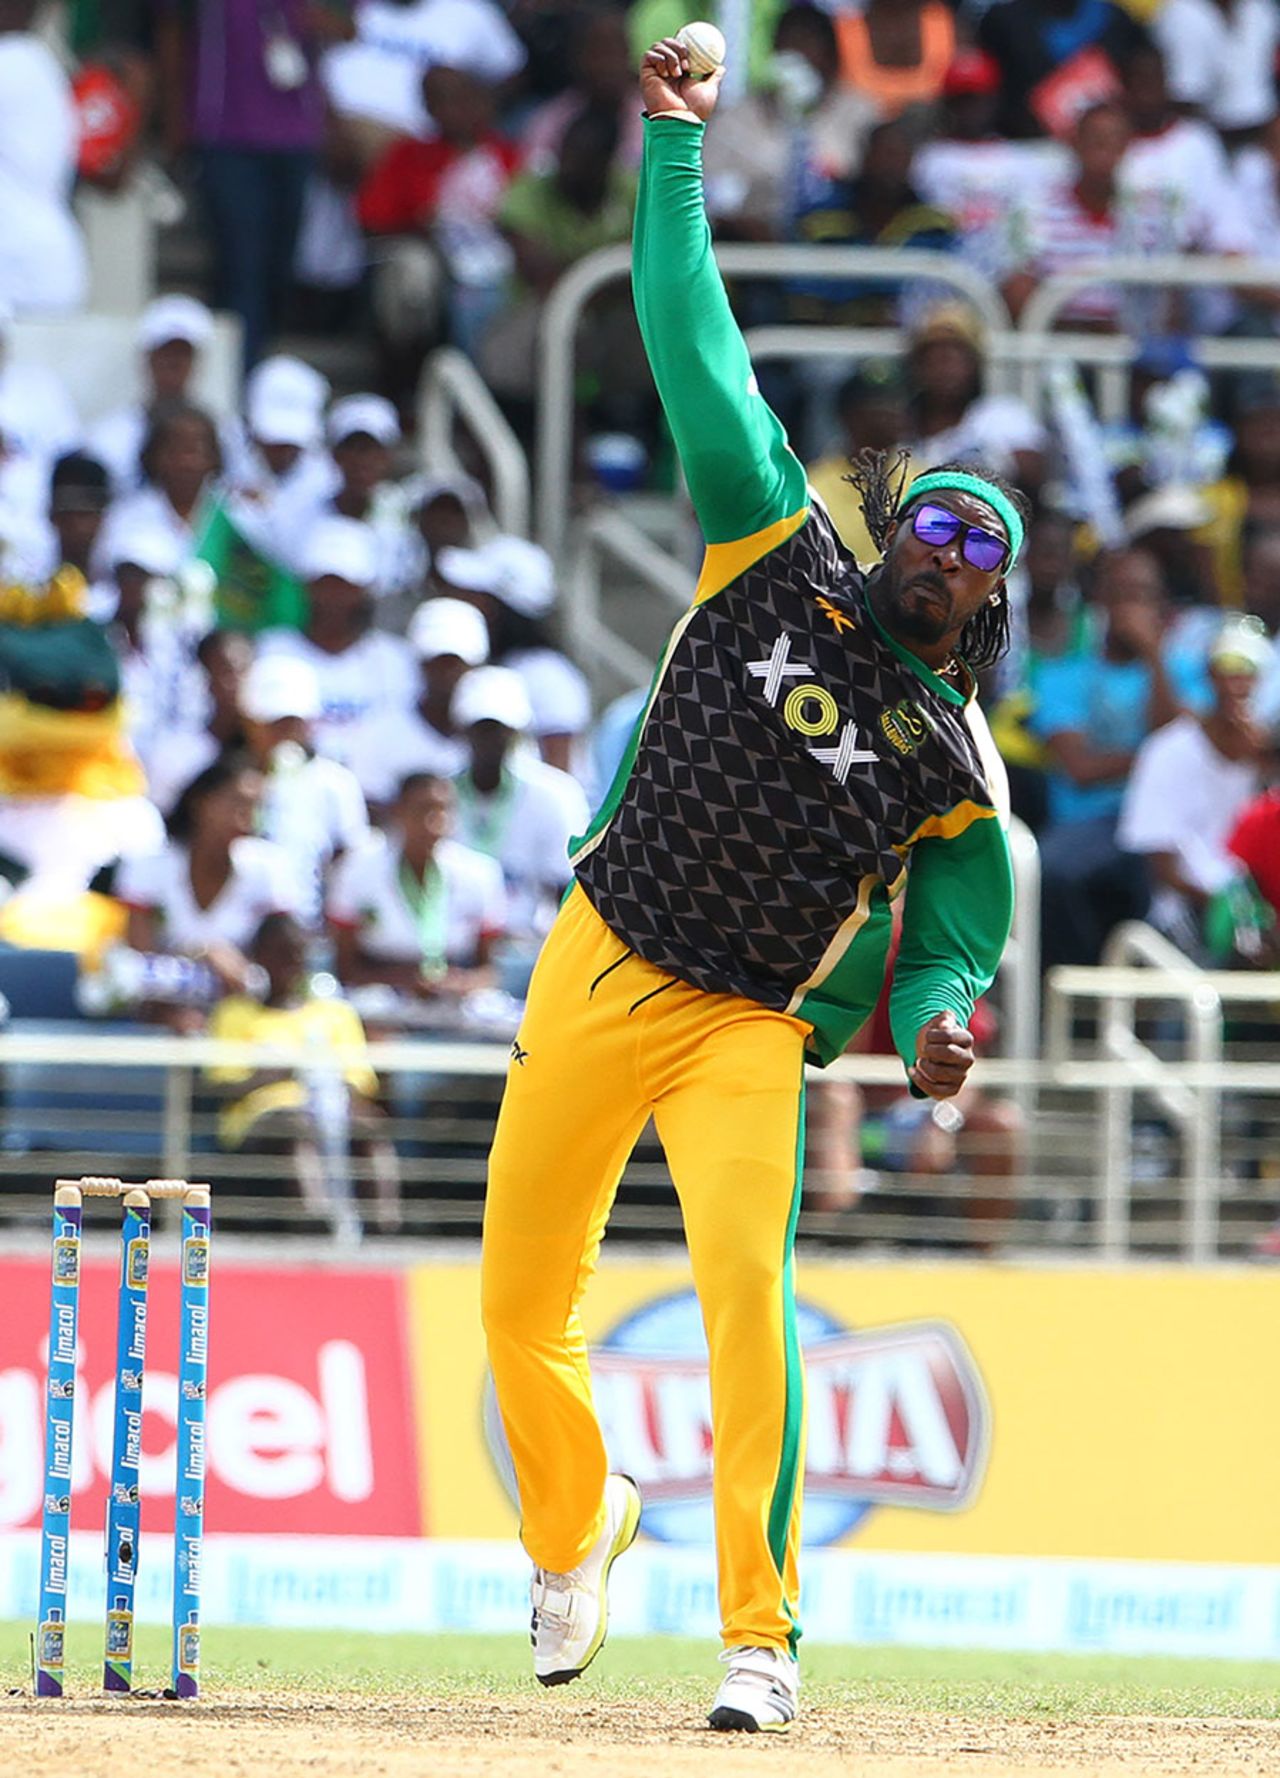 Chris Gayle in his delivery stride, Jamaica Tallawahs v Barbados Tridents, Caribbean Premier League 2013, Jamaica, August 17, 2013